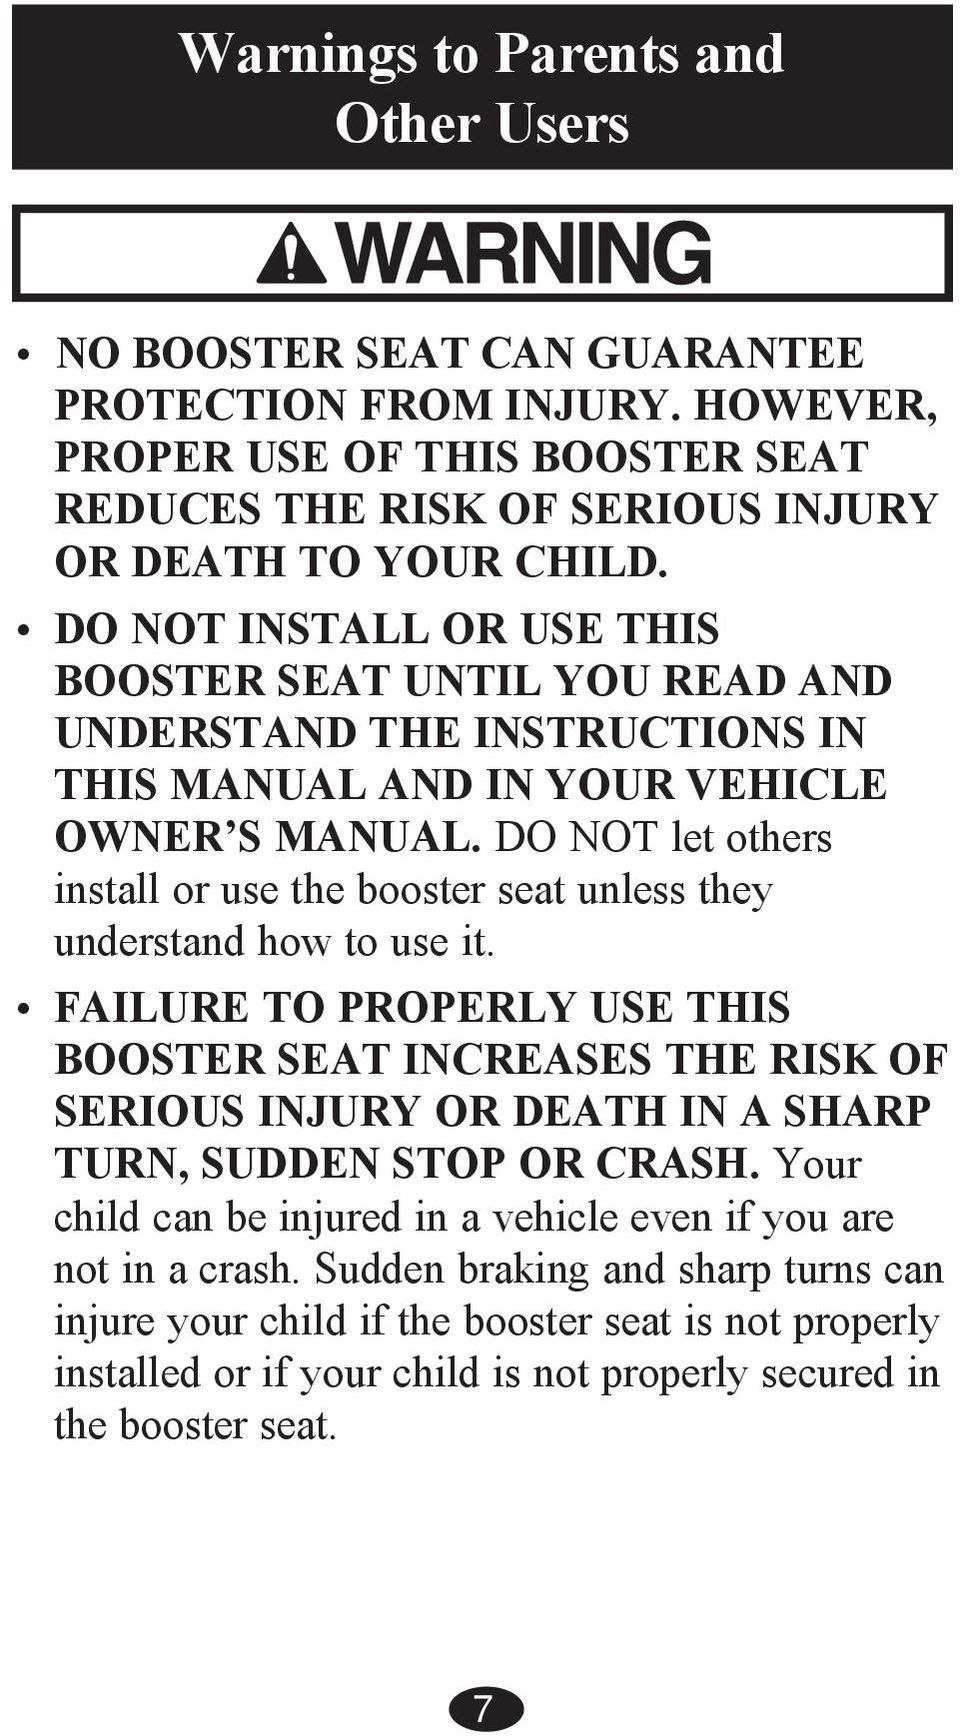 DO NOT let others install or use the booster seat unless they understand how to use it.